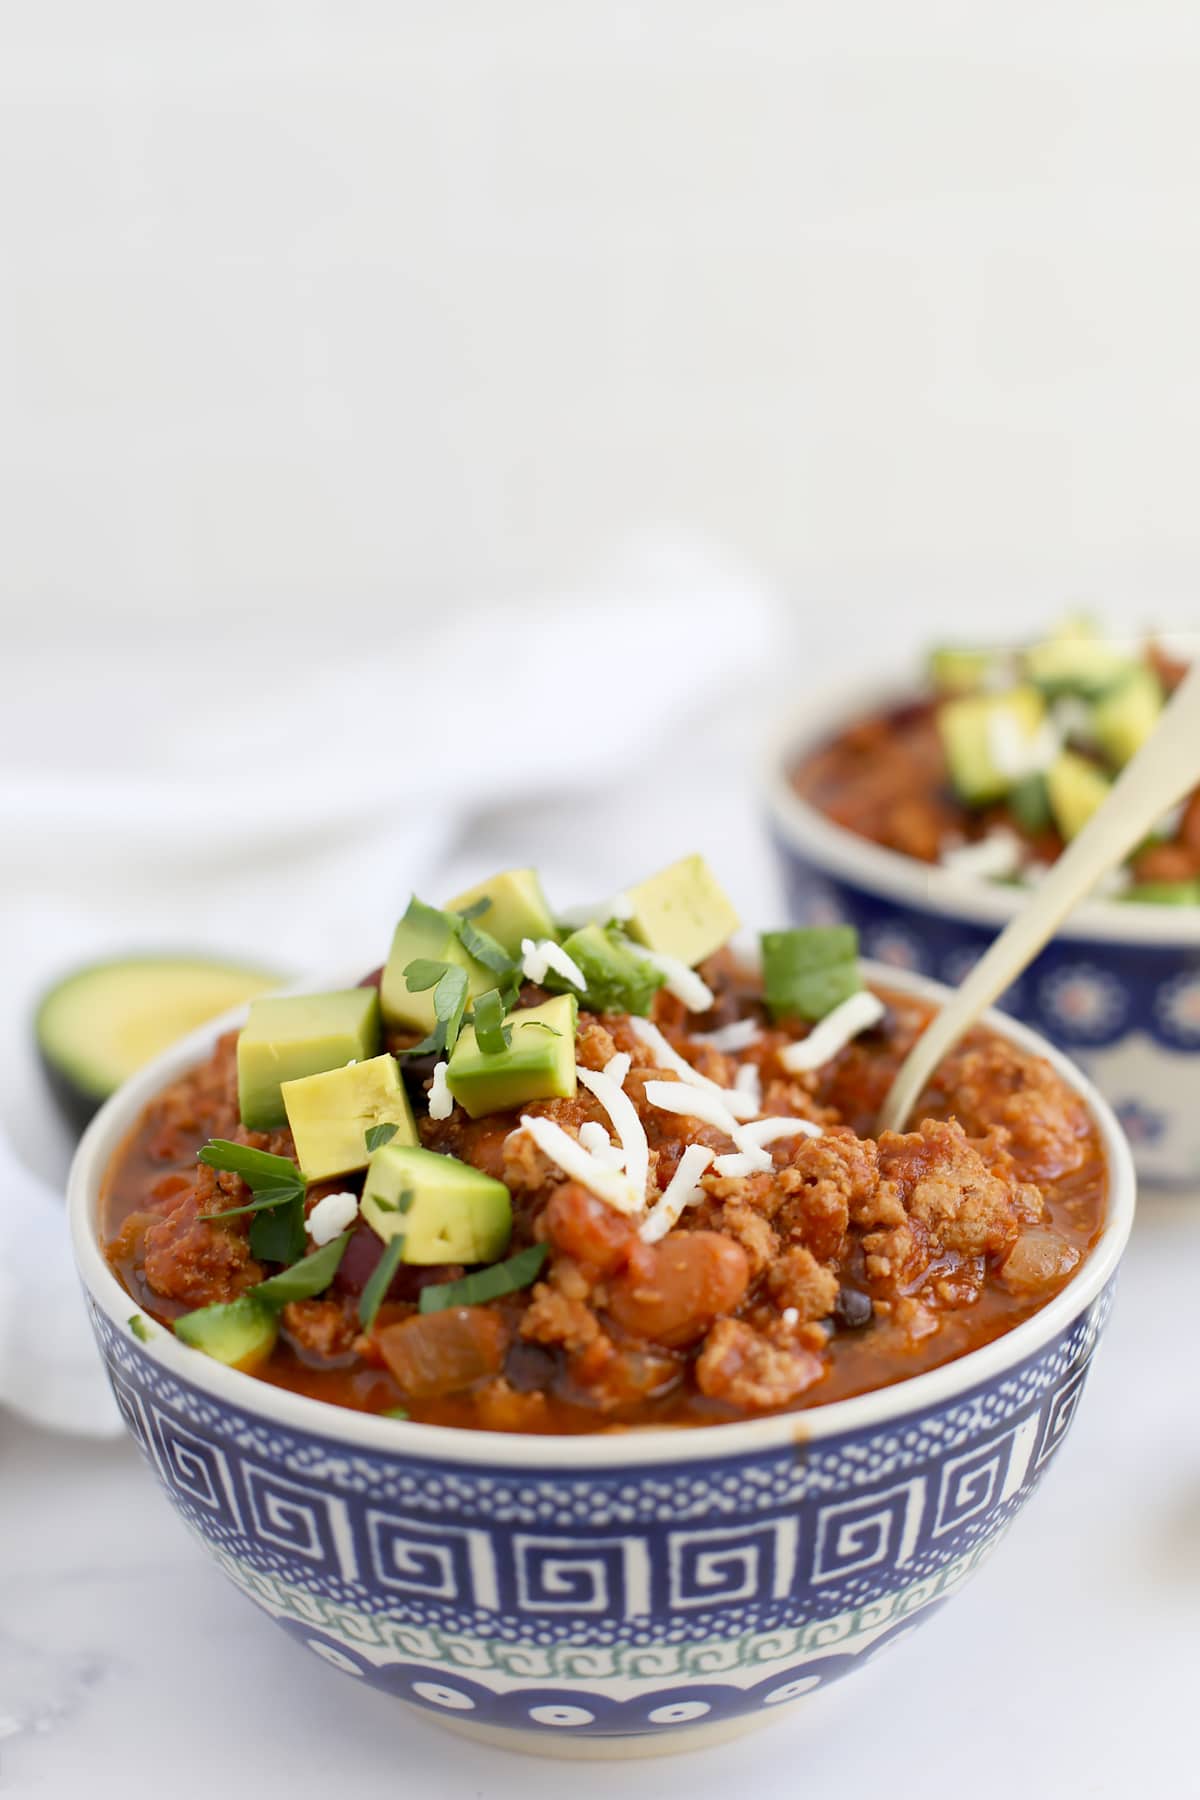 A blue and white ceramic bowl filled with turkey chili and topped with cilantro and avocado.